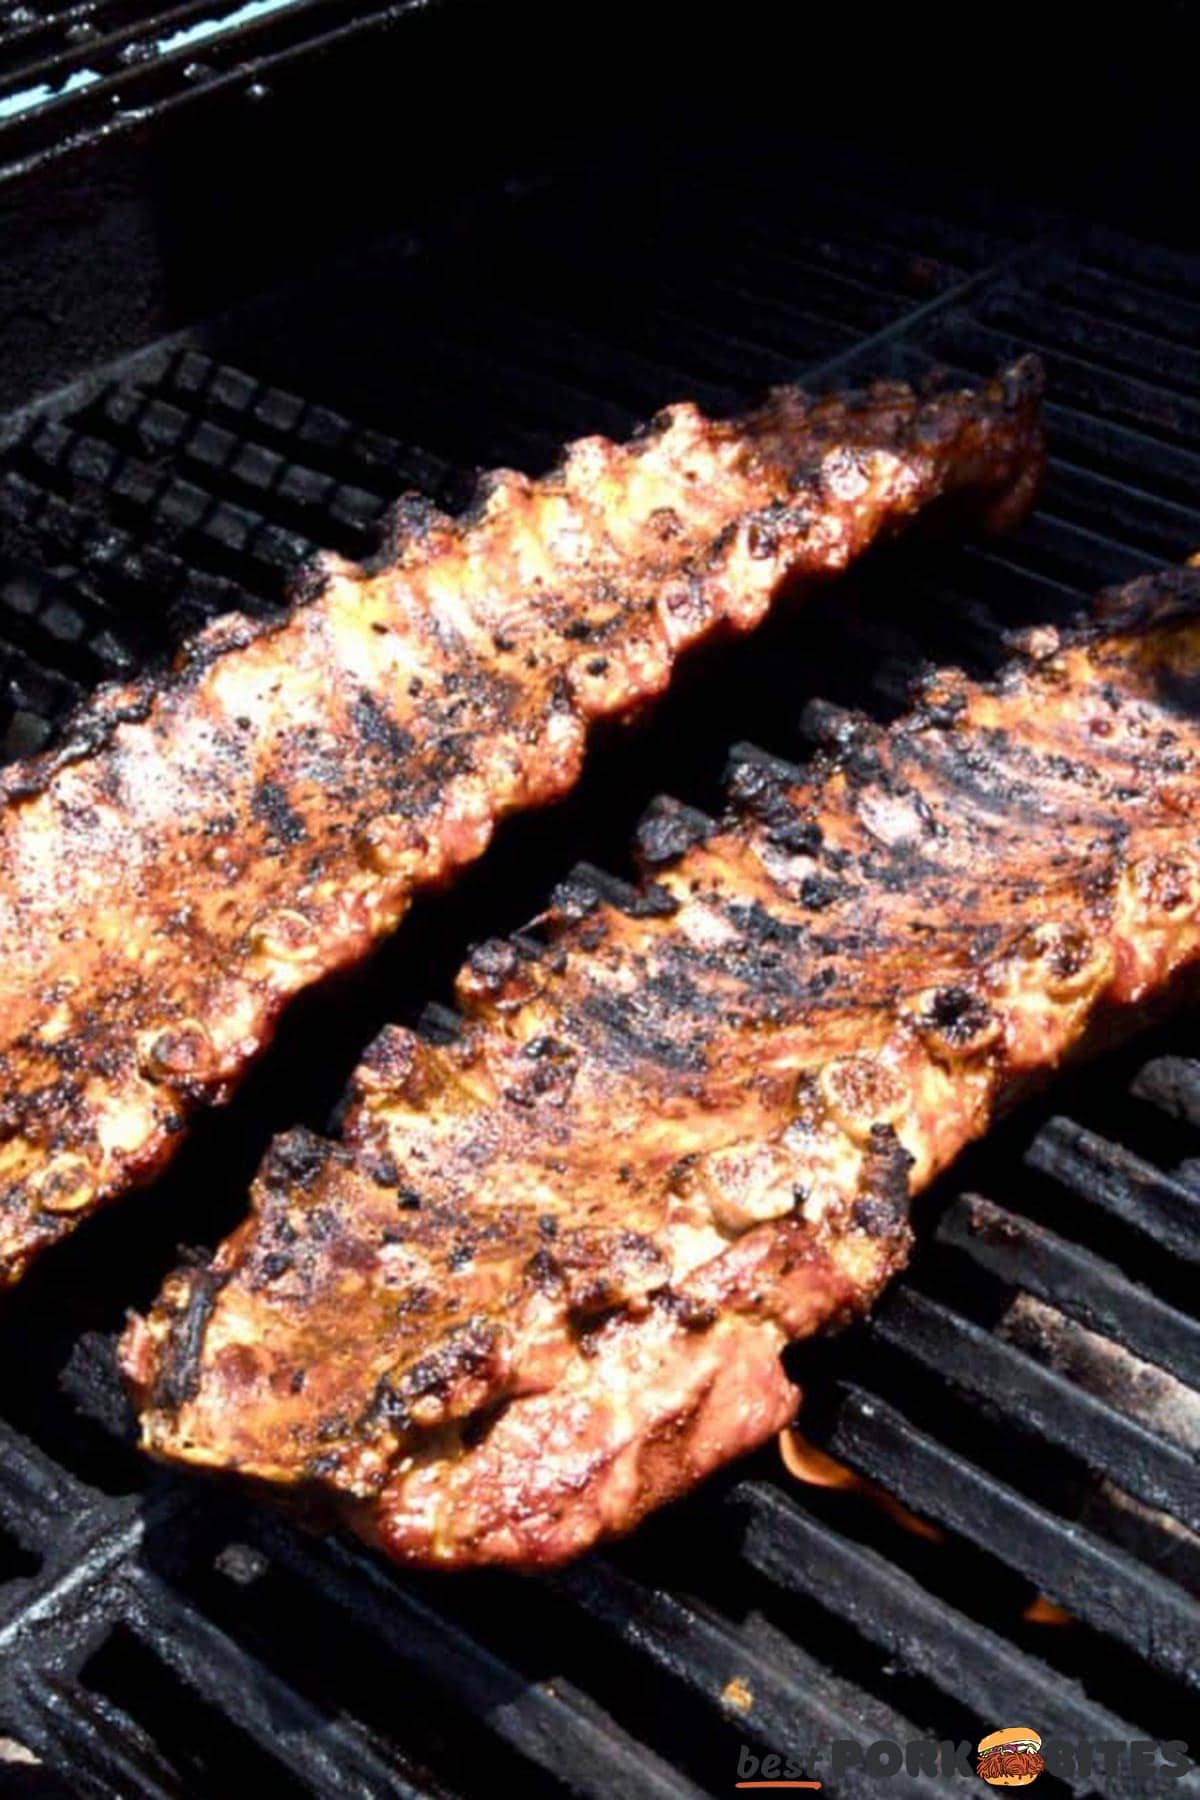 pork ribs being barbecued on a grill